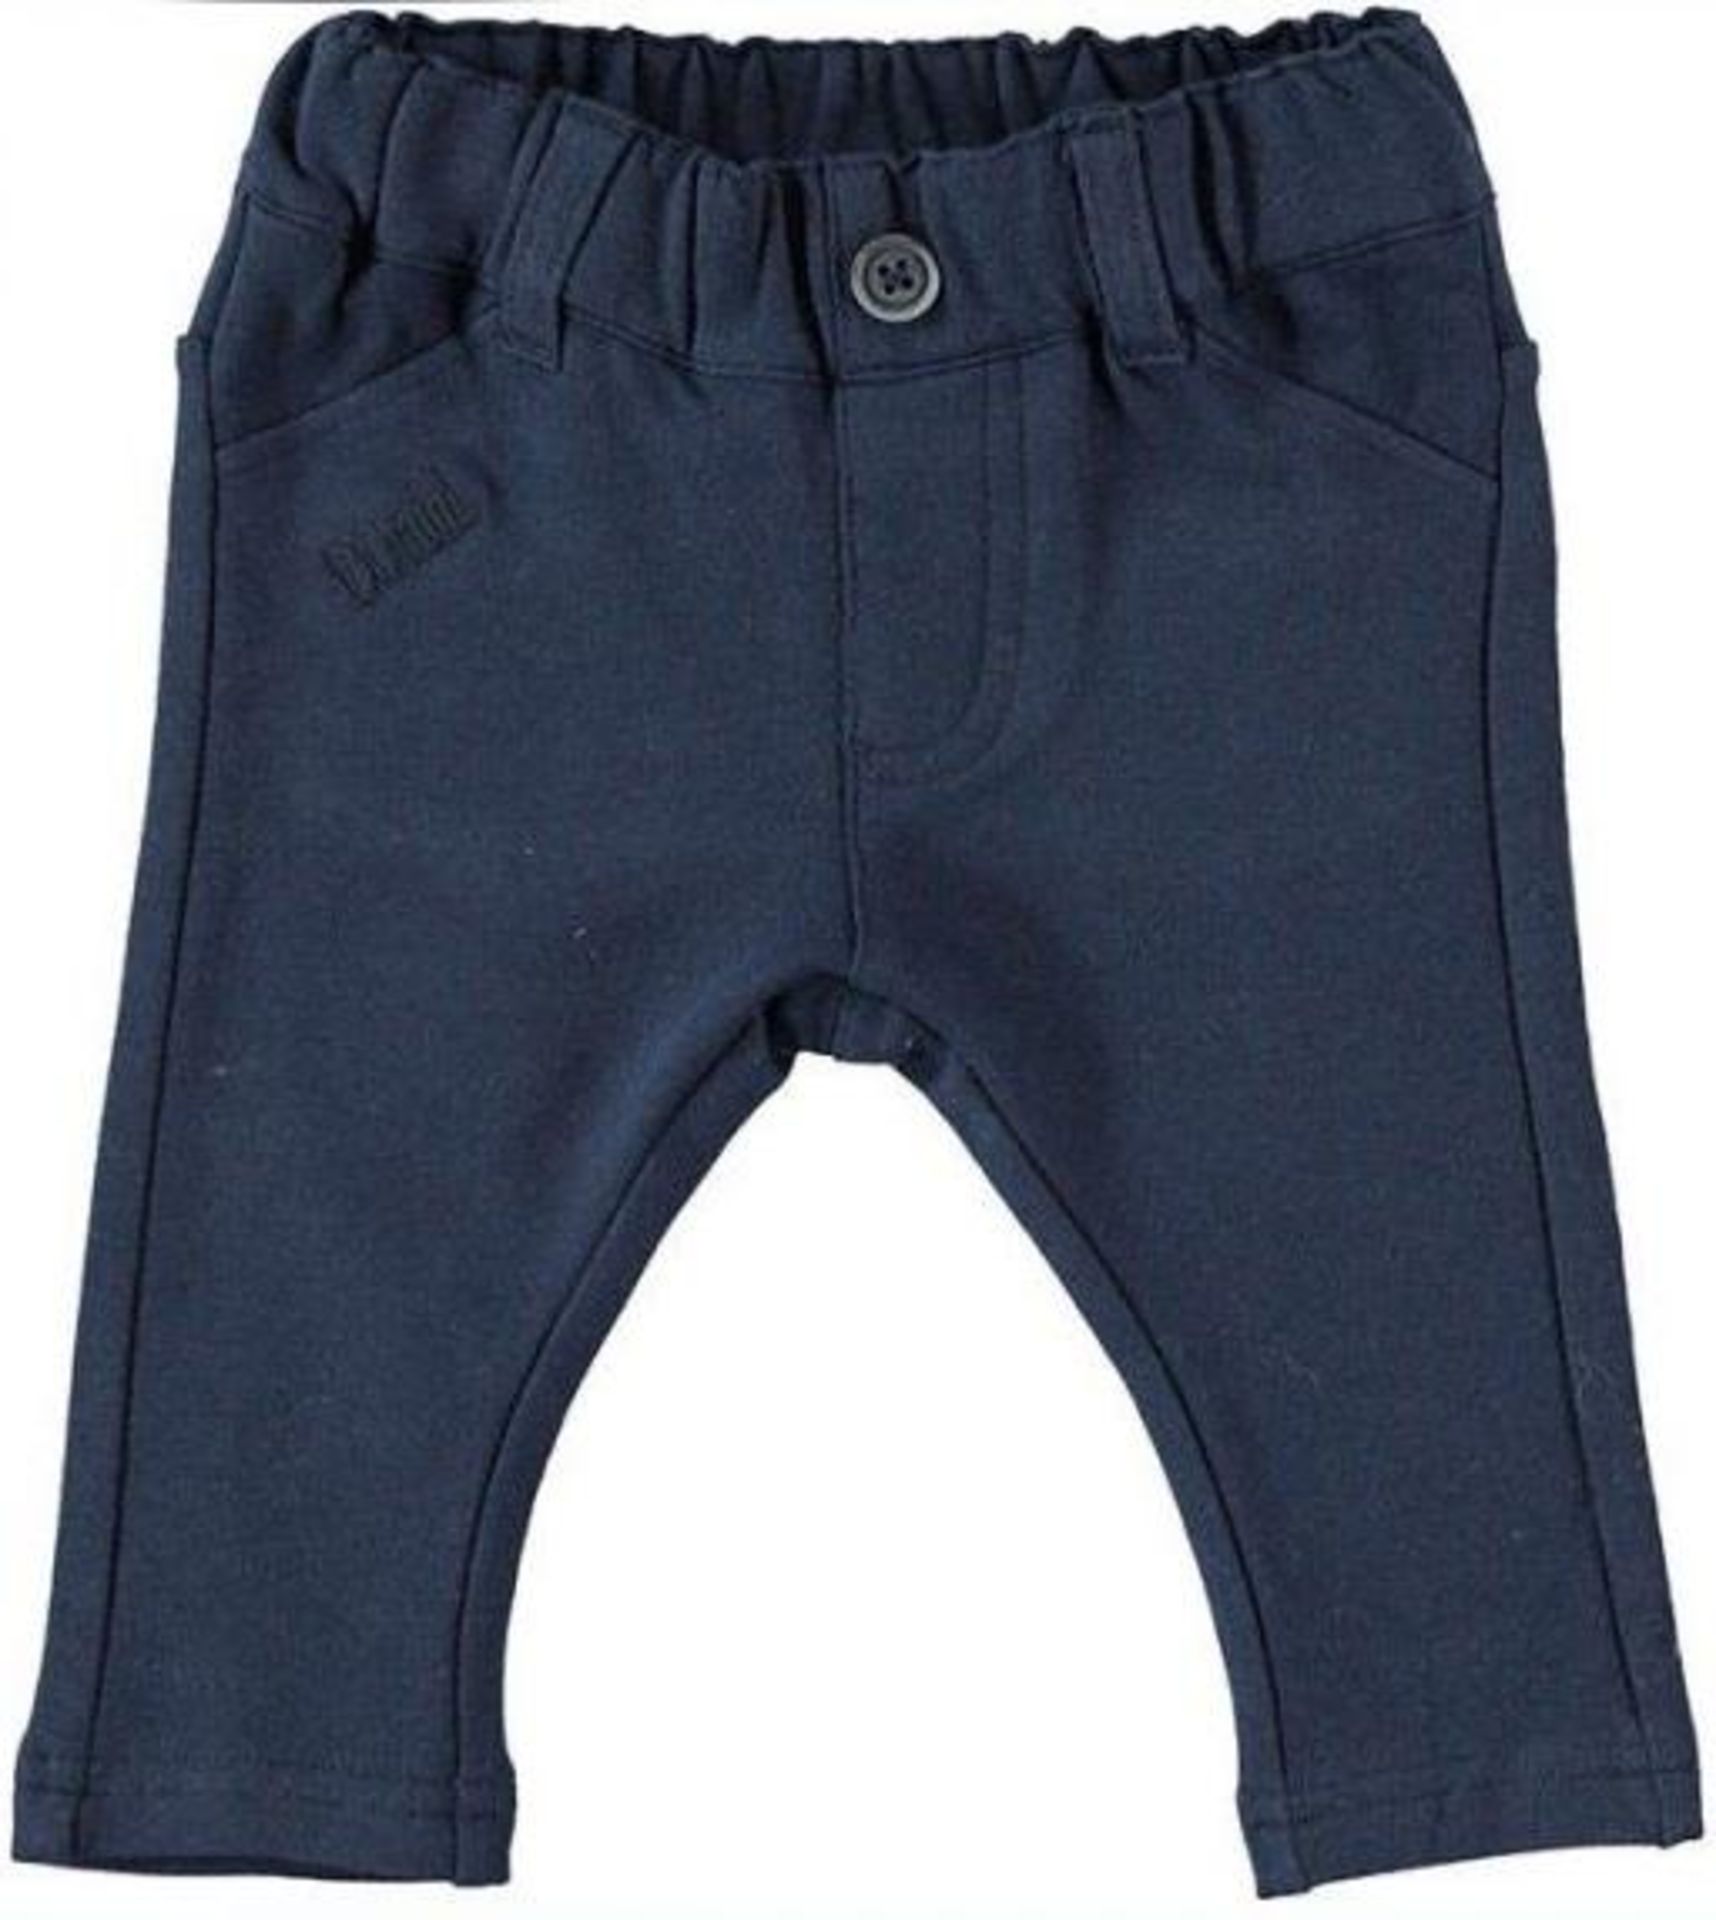 1 x iDO Trousers - New With Tags - Size: 6M - Ref: W071 - CL580 - NO VAT ON THE HAMMER - Location